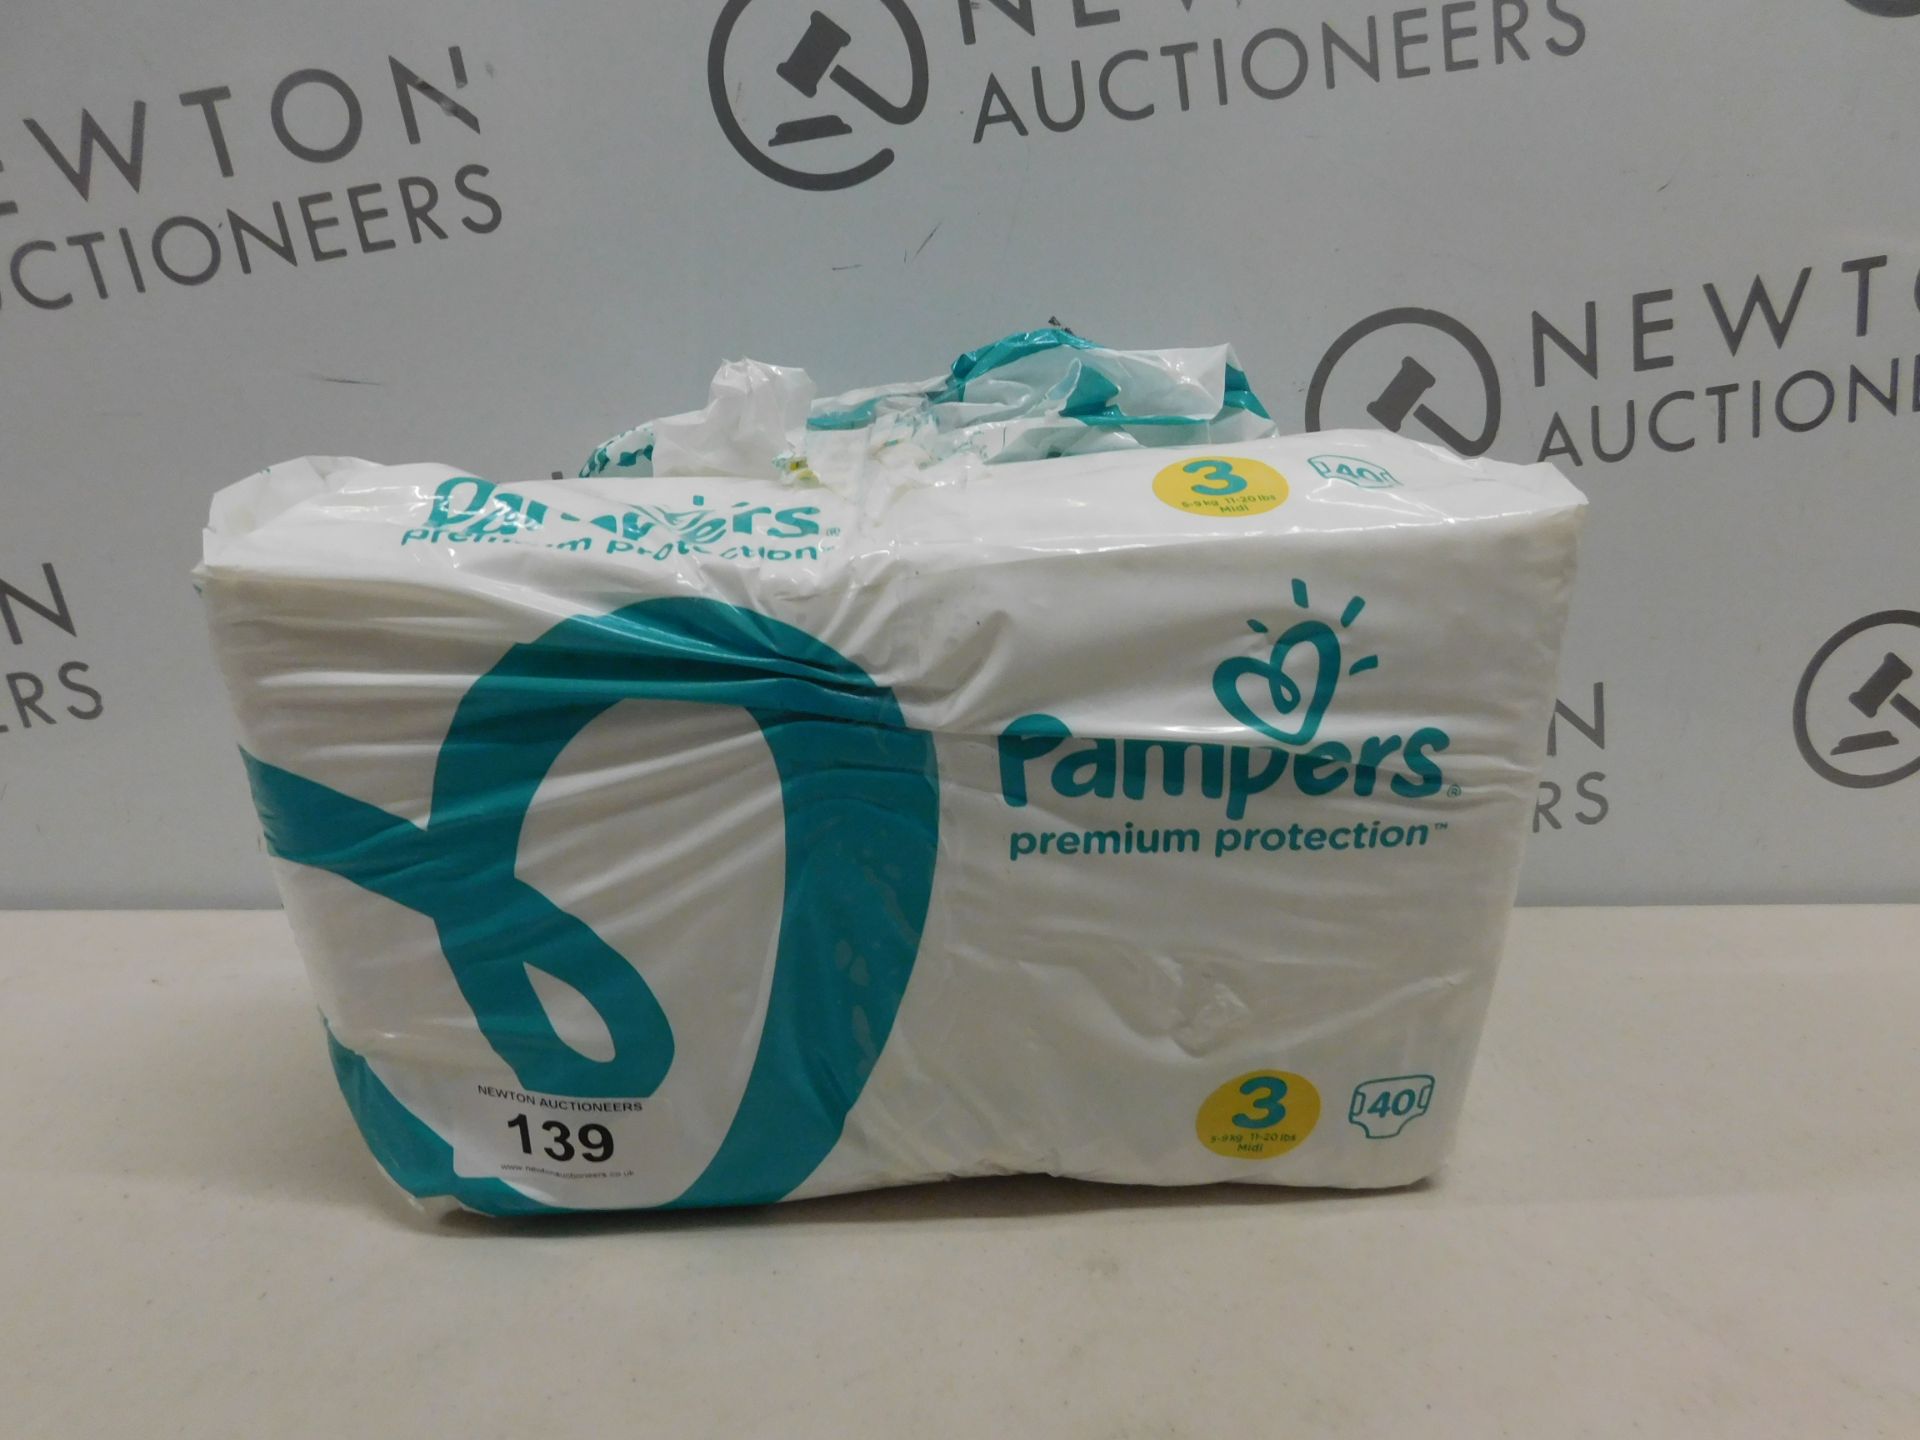 1 PACK OF 40 PAMPERS SIZE 3 PREMIUM PROTECTION NAPPIES RRP £9.99